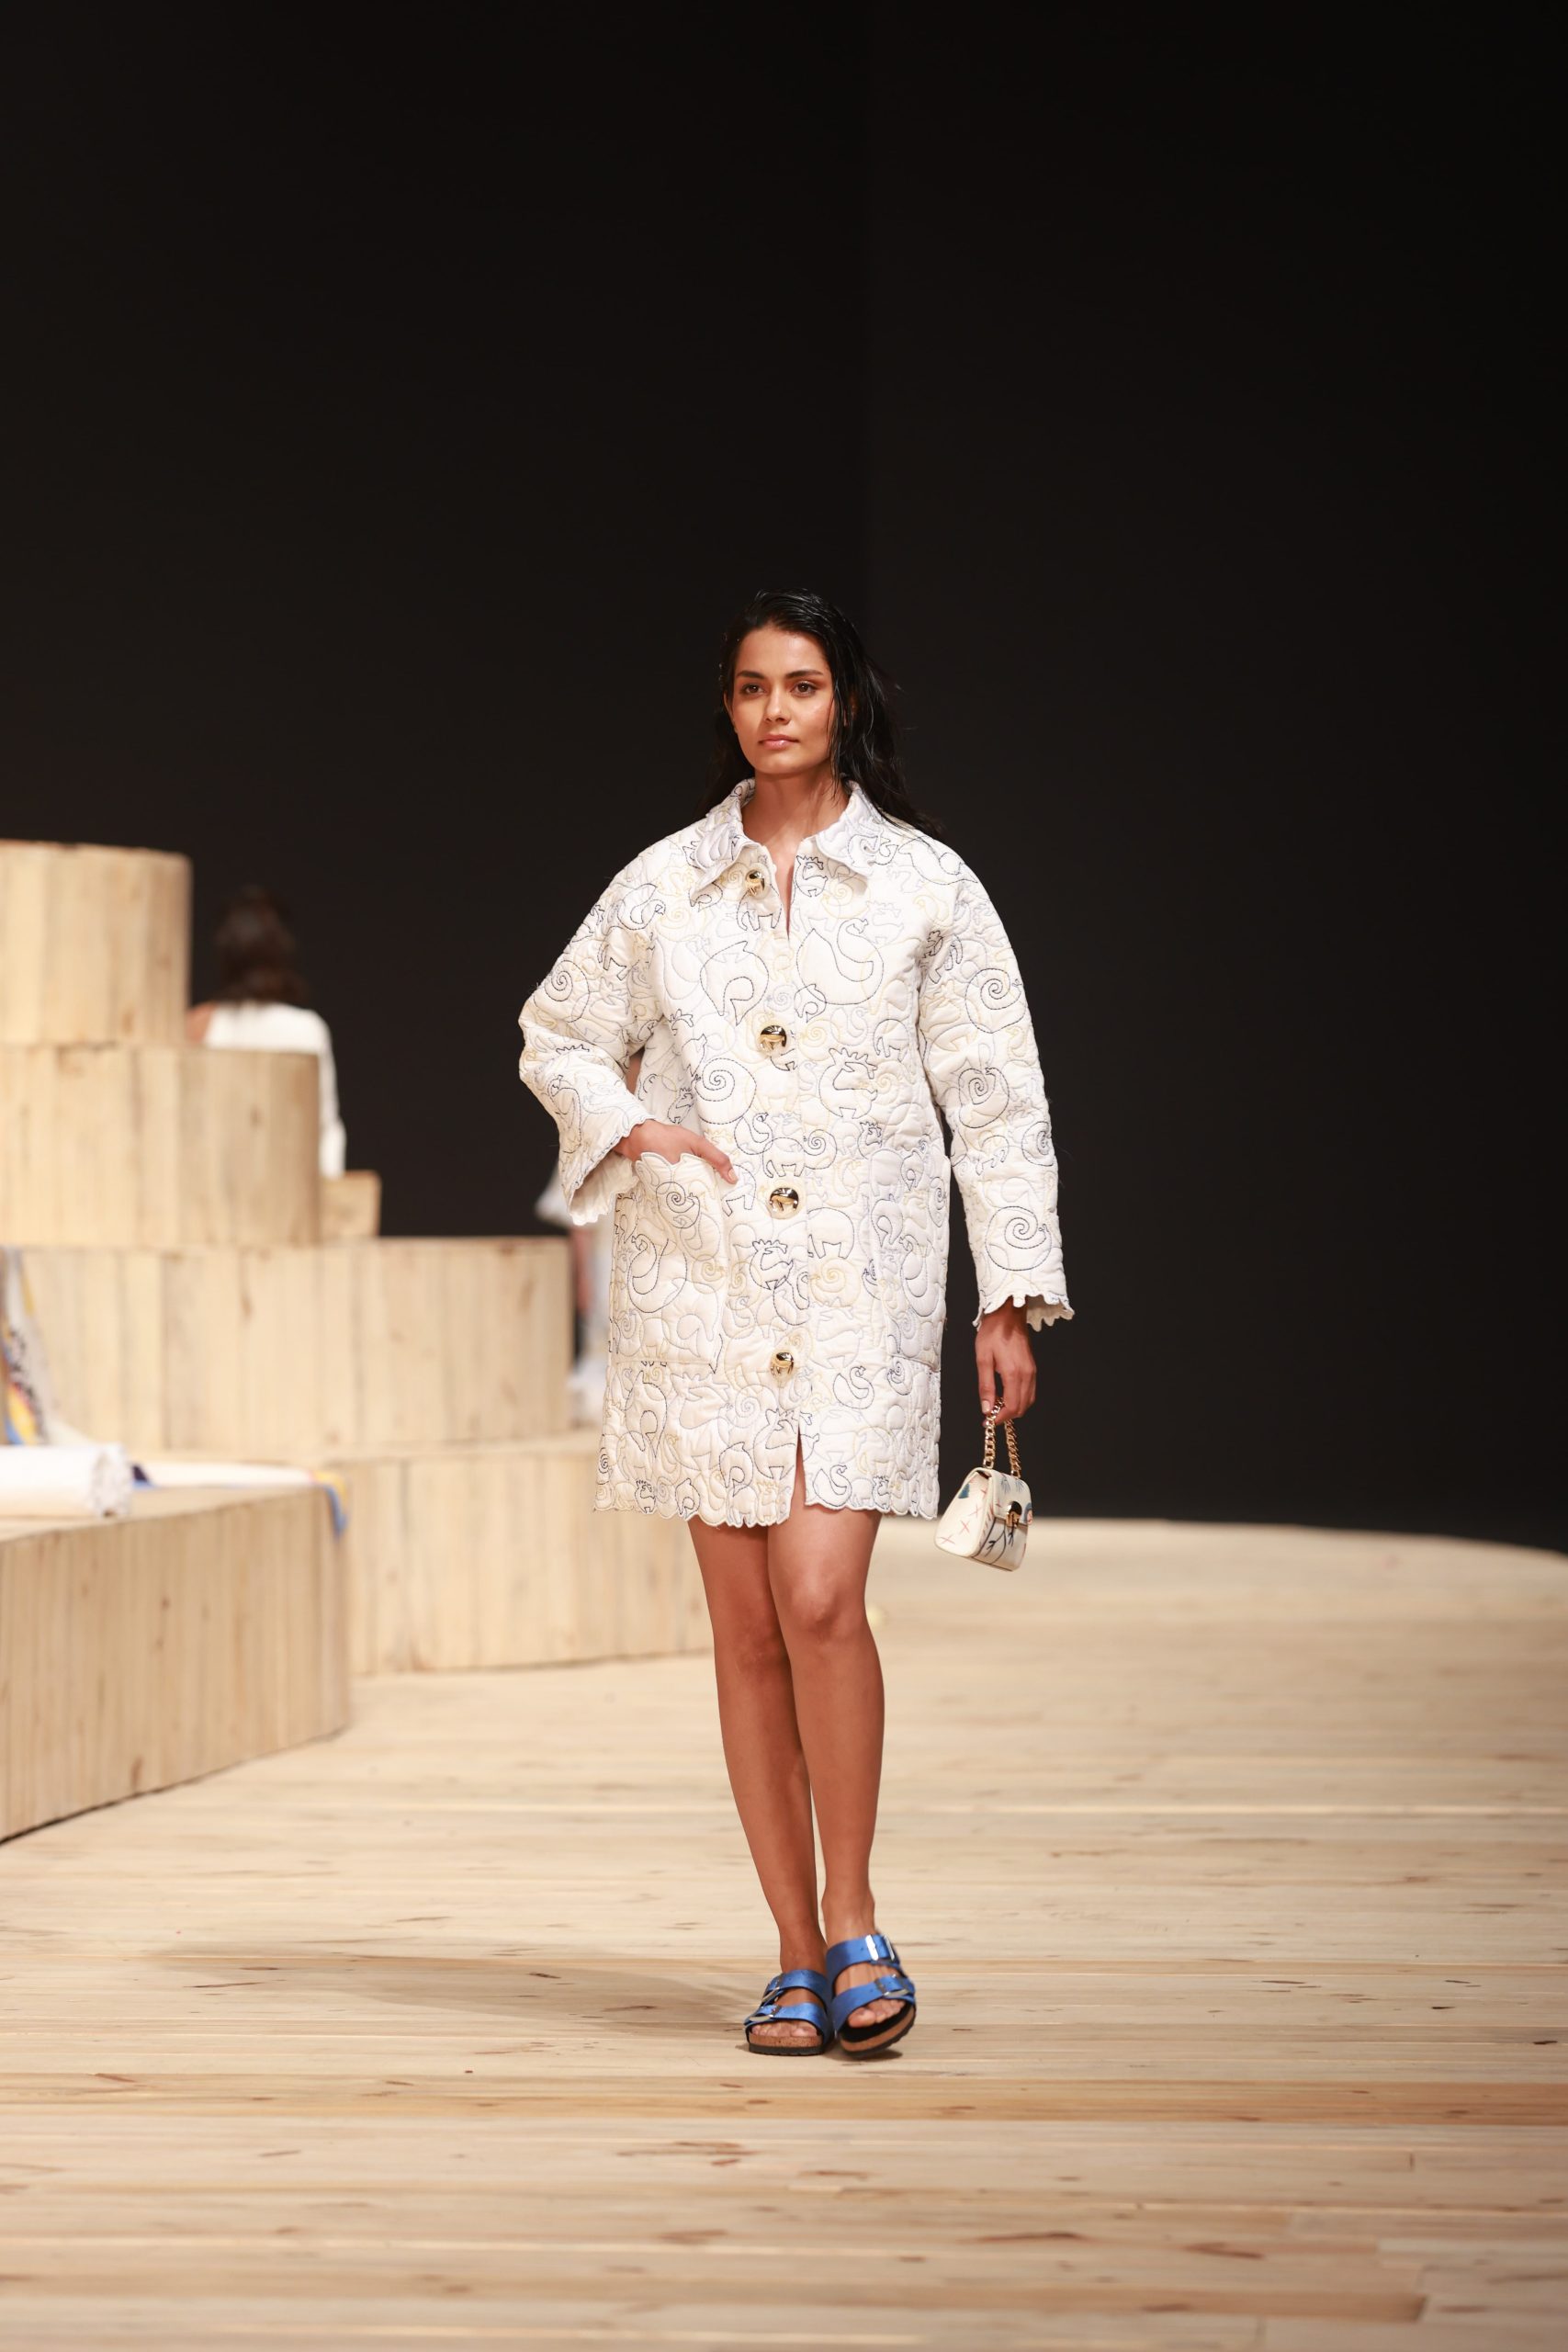 BIRKENSTOCK presents GROUNDED IN NATURE with SHIVAN NARRESH at LAKMÉ FASHION WEEK X FDCI(5) min